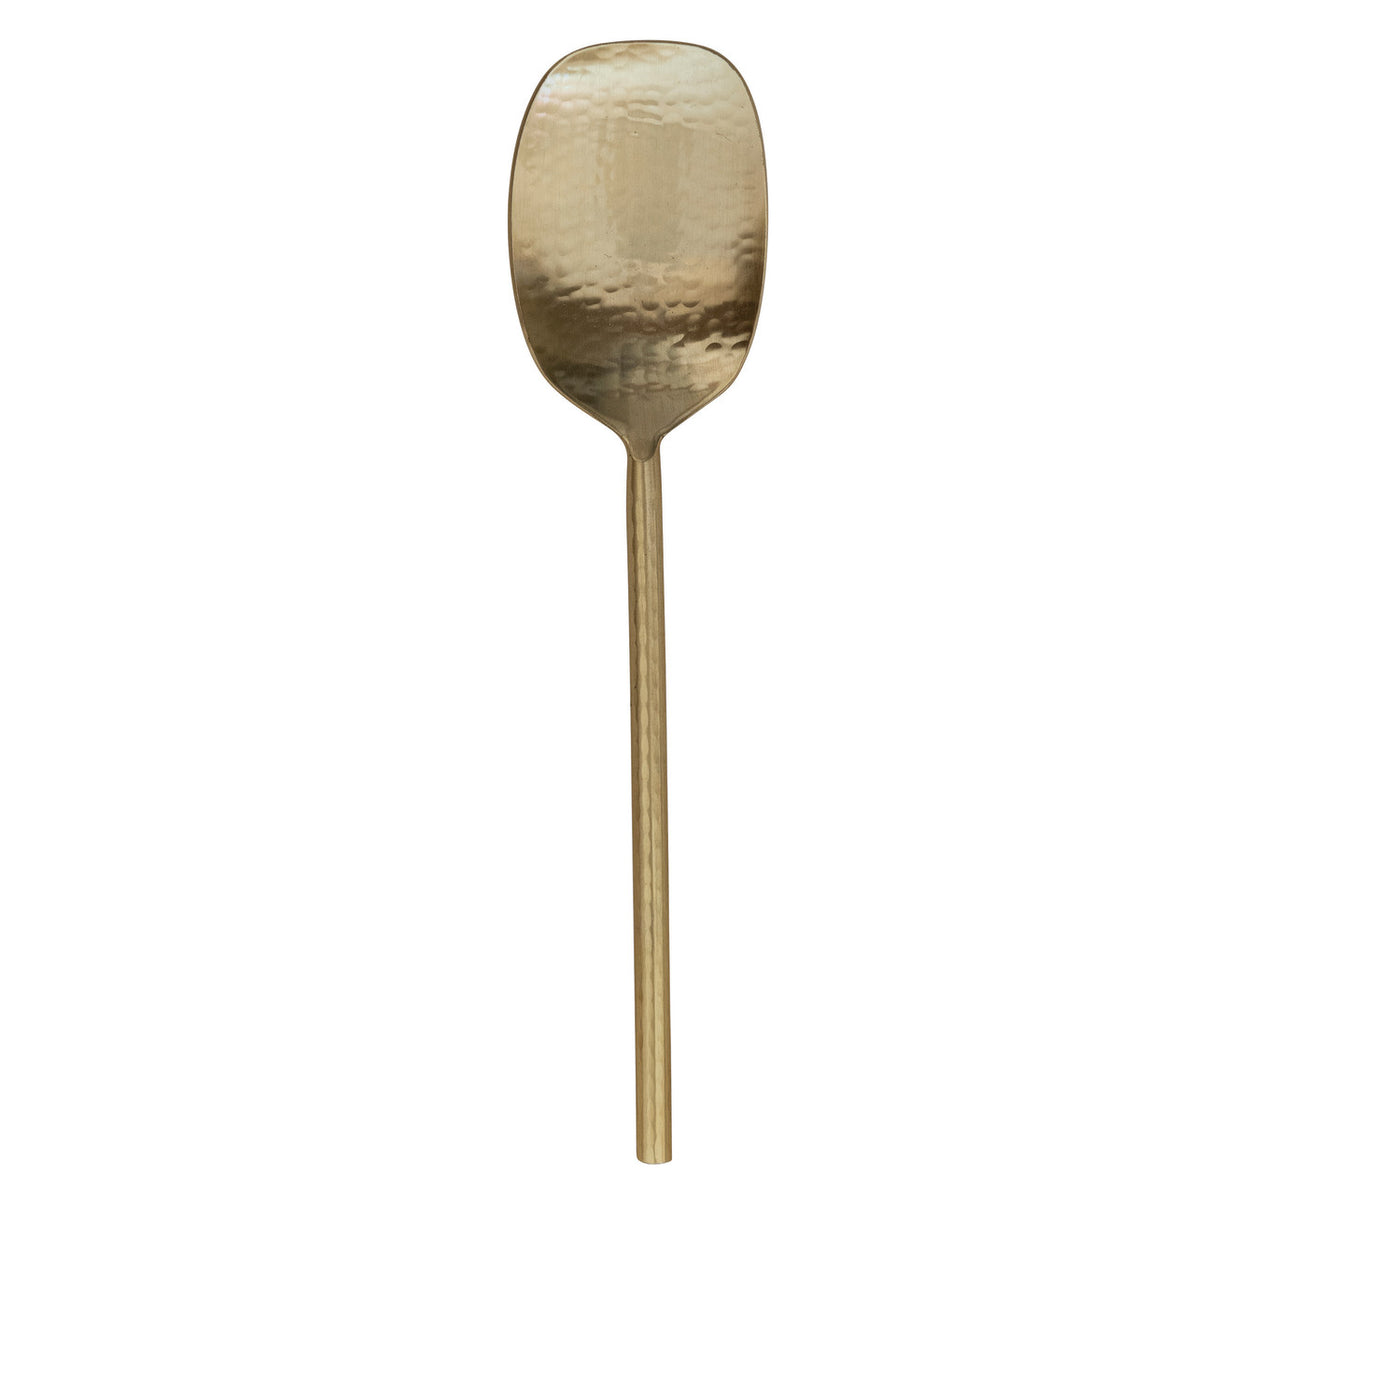 Hammered Stainless Steel Serving Spoon in Gold Finish